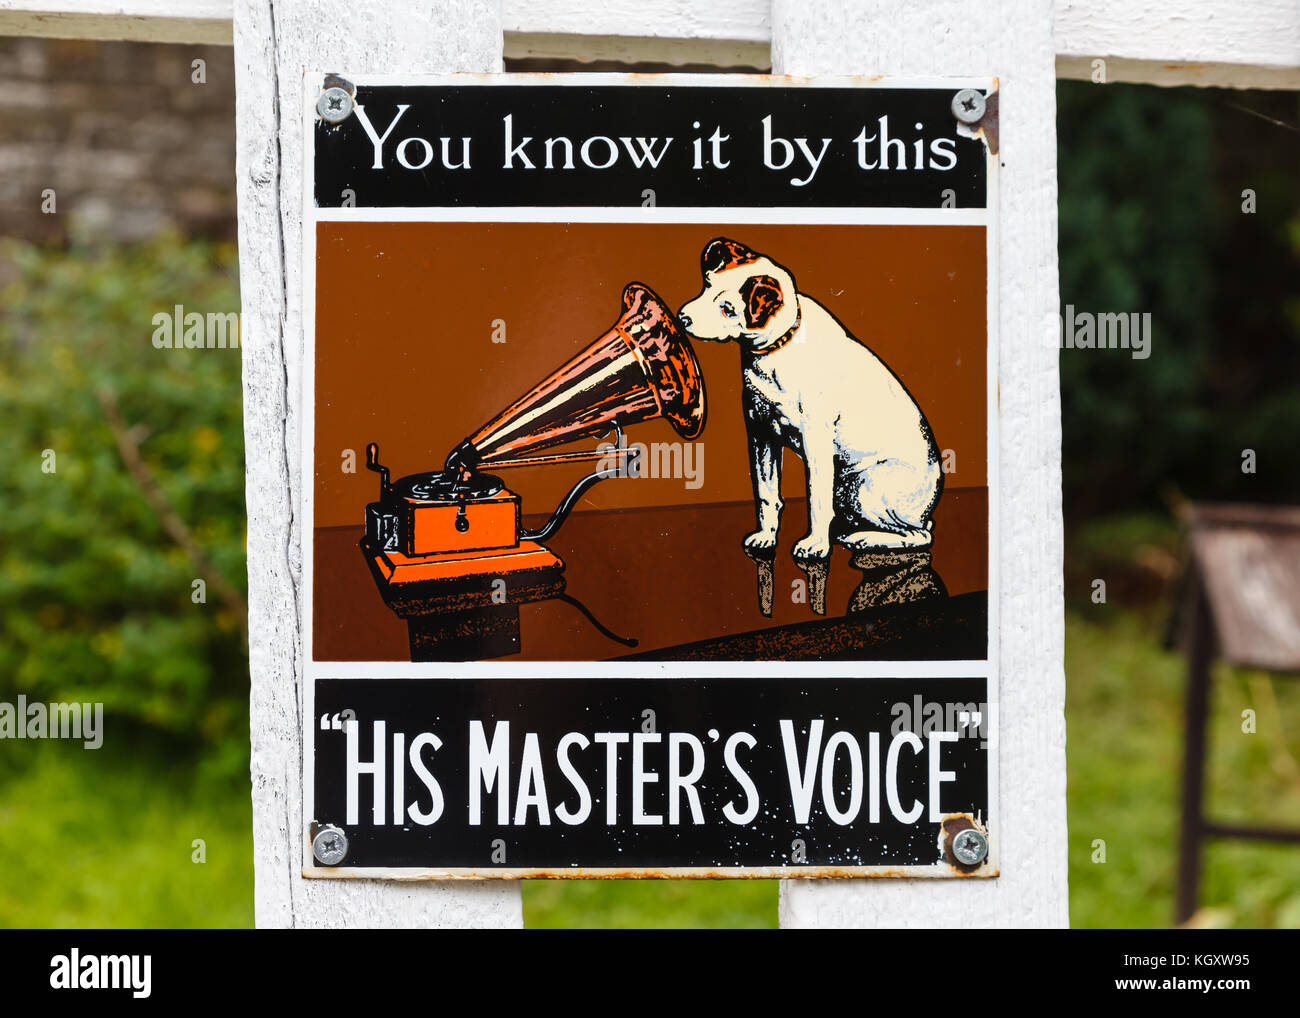 Old style tin advertising board for His Master's Voice displayed on a painted wooden fence background. Stock Photo